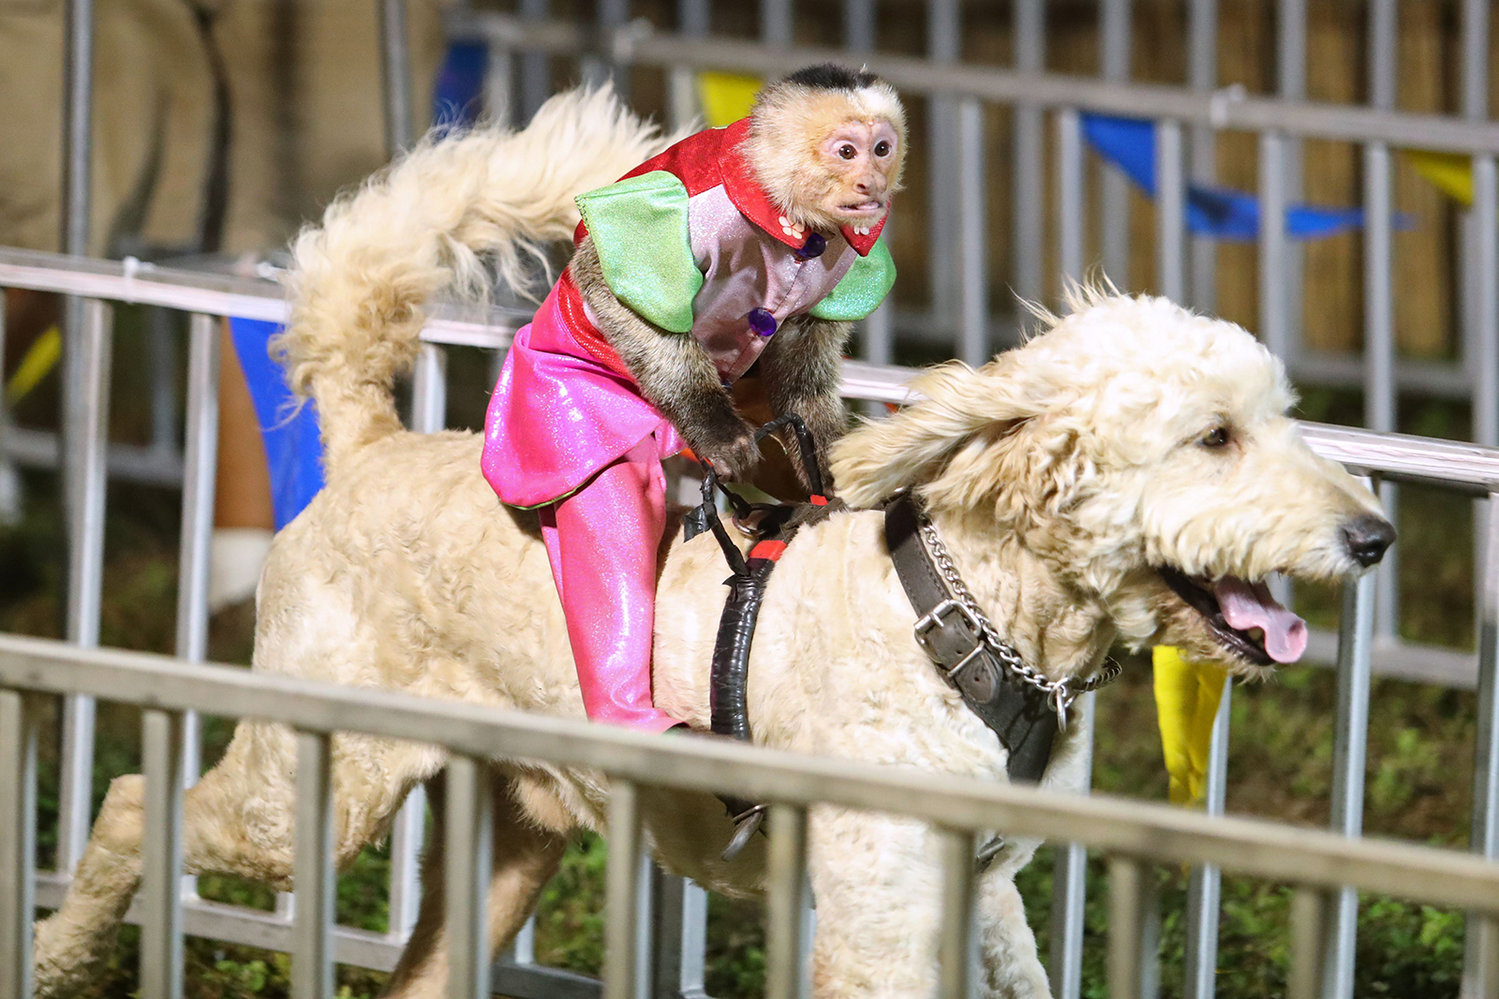 A monkey named Burt rides Ace during a Banana Derby race Monday at the Broward County Fair in Margate. While some spectators say the act is cute, animal activists say the show is cruel to both monkey and dog. (John McCall/Sun Sentinel/TNS)